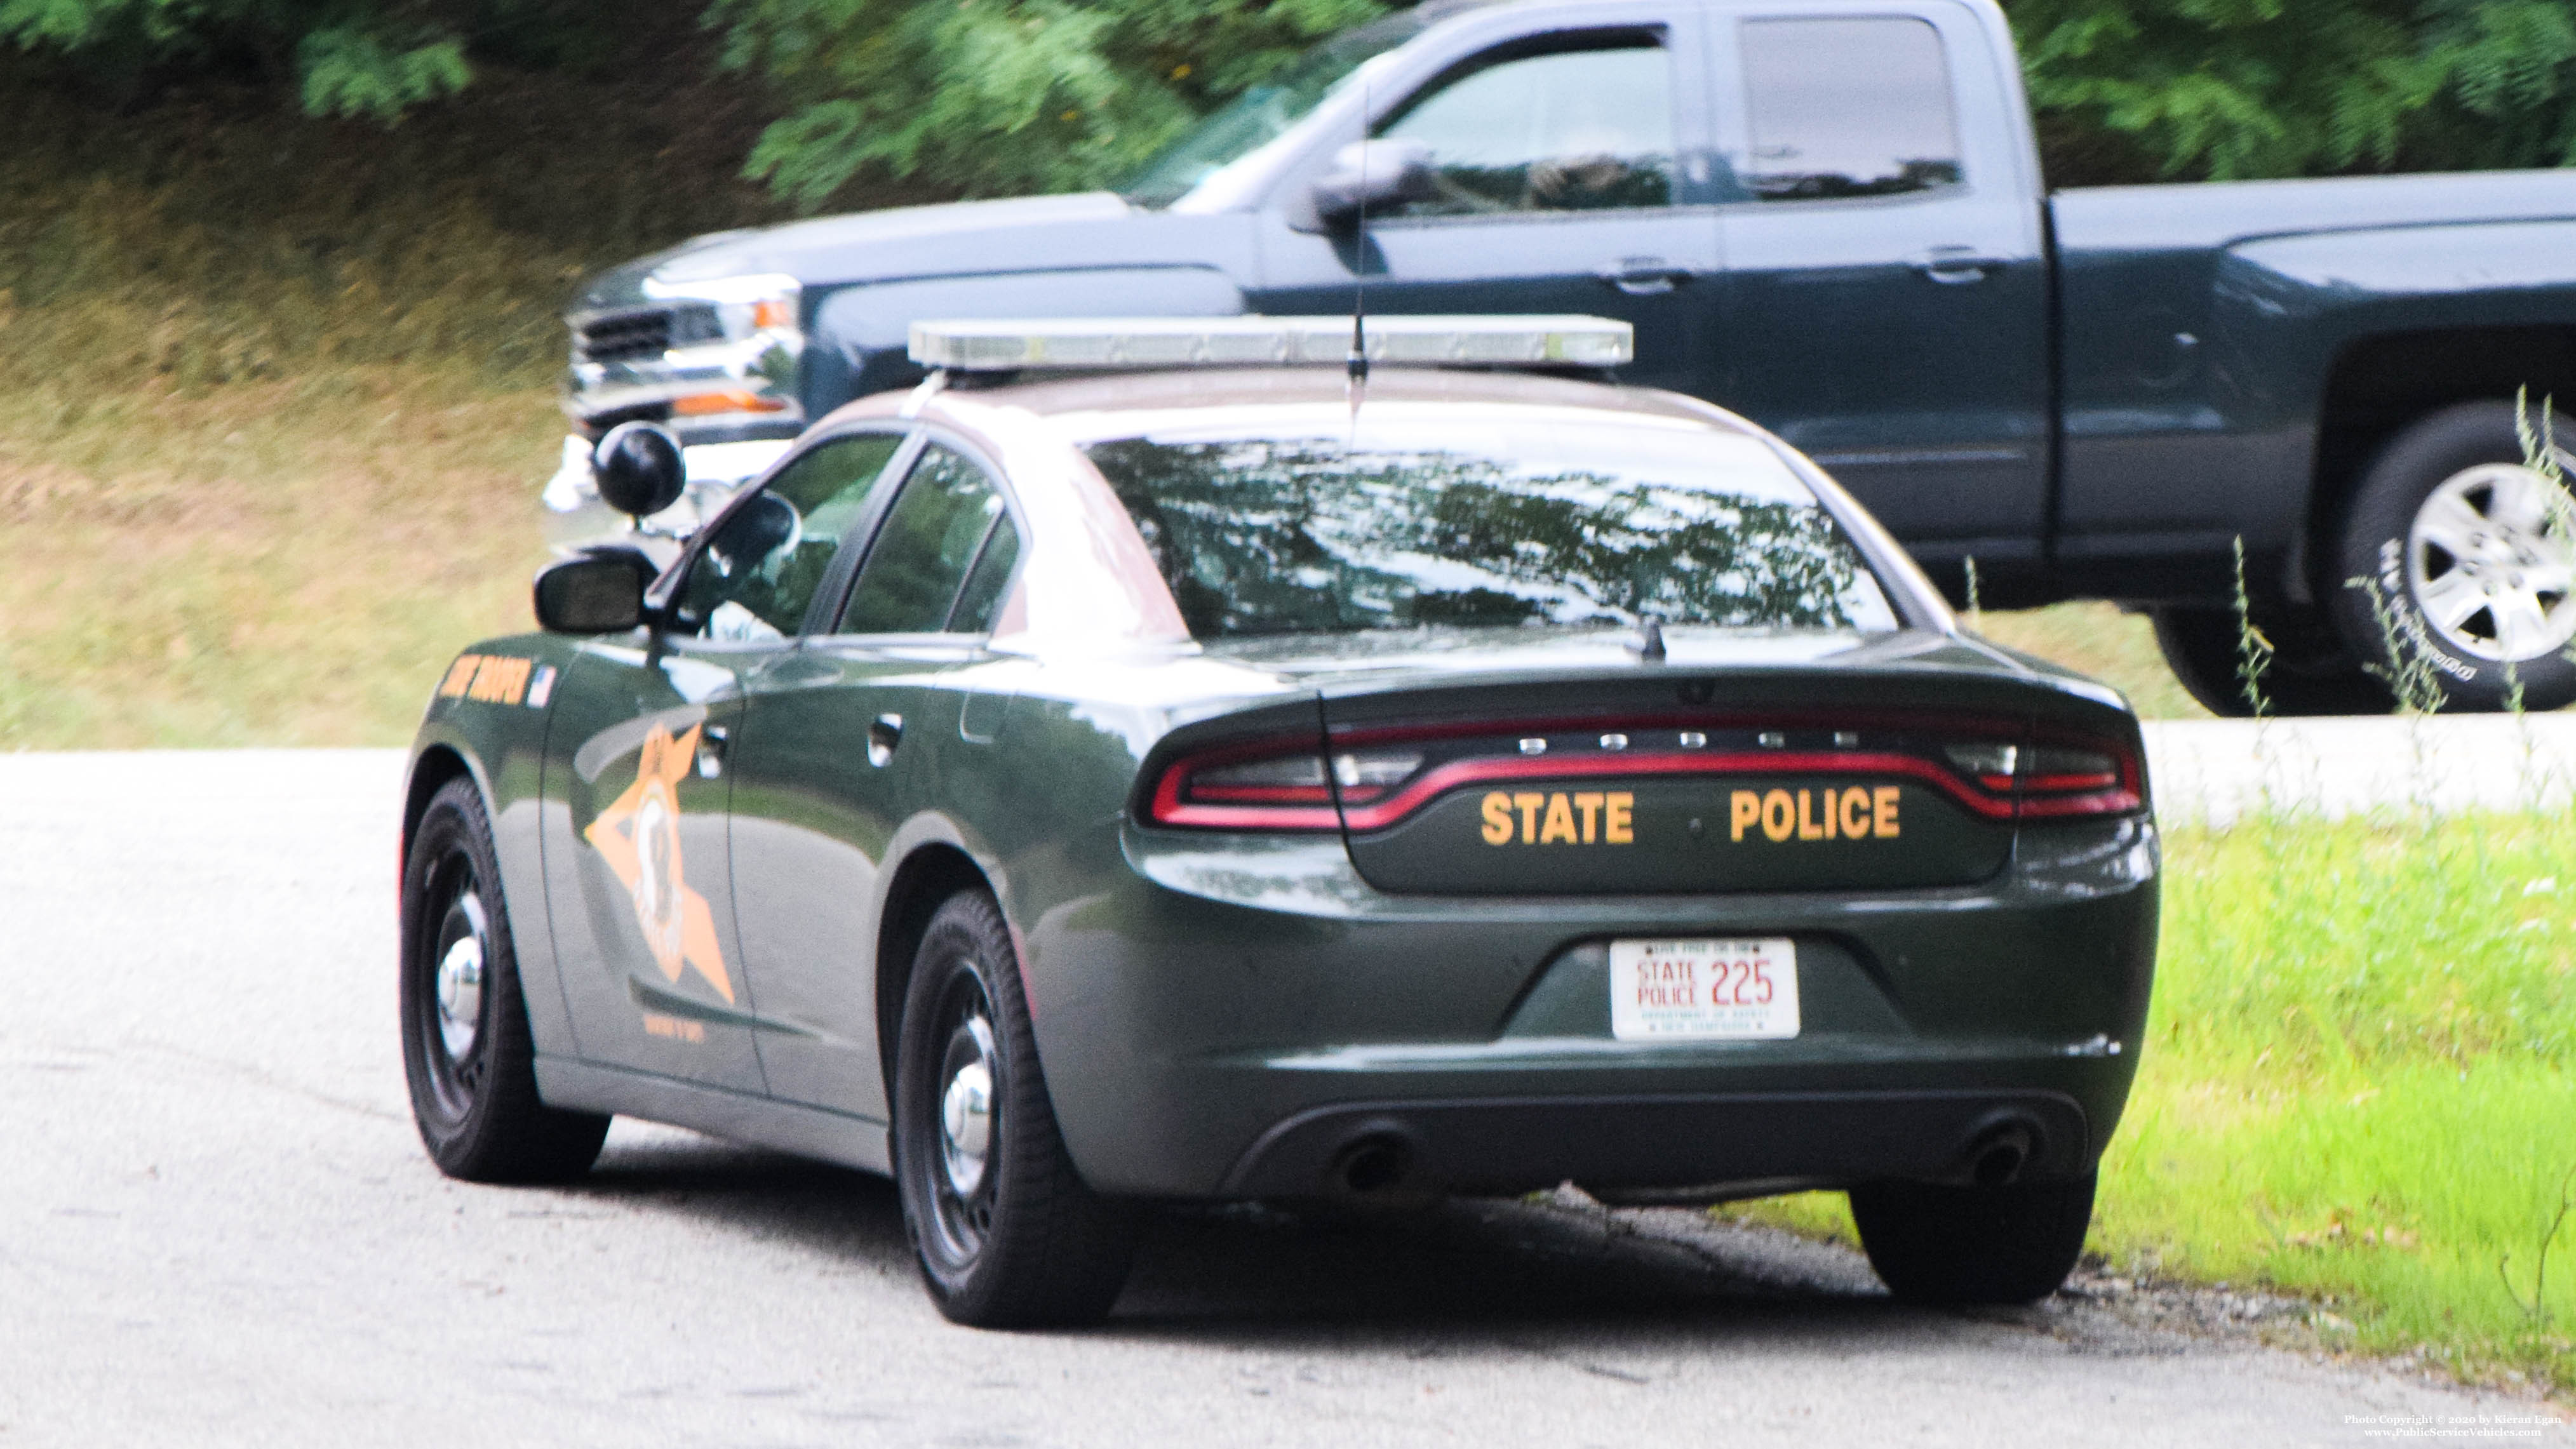 A photo  of New Hampshire State Police
            Cruiser 225, a 2015-2019 Dodge Charger             taken by Kieran Egan